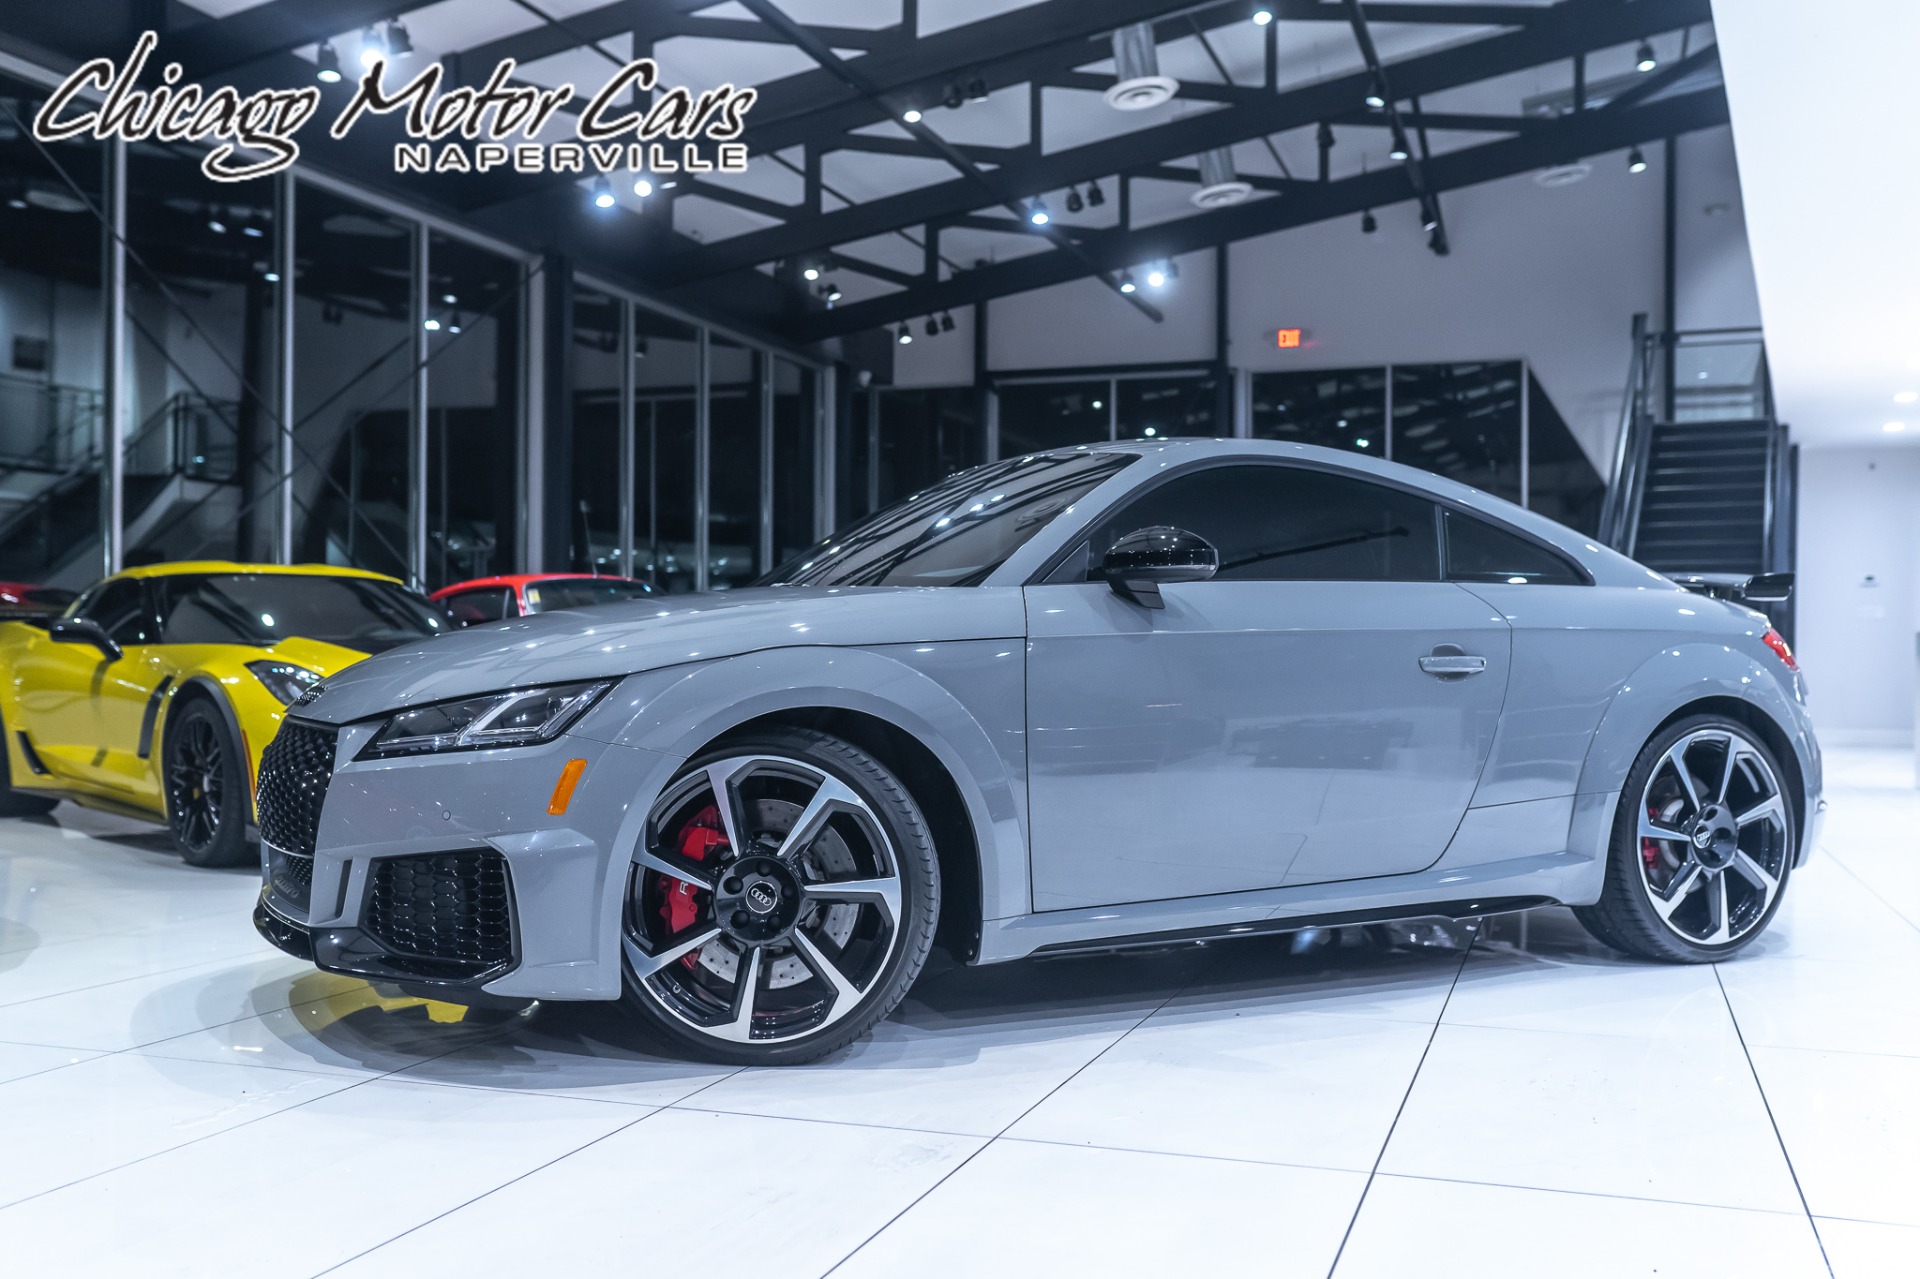 Used 2020 Audi Tt Rs 2.5T Quattro Coupe Nardo Grey! Low Miles! Tech Pkg!  Dynamic Pkg! Loaded For Sale (Special Pricing) | Chicago Motor Cars Stock  #19458